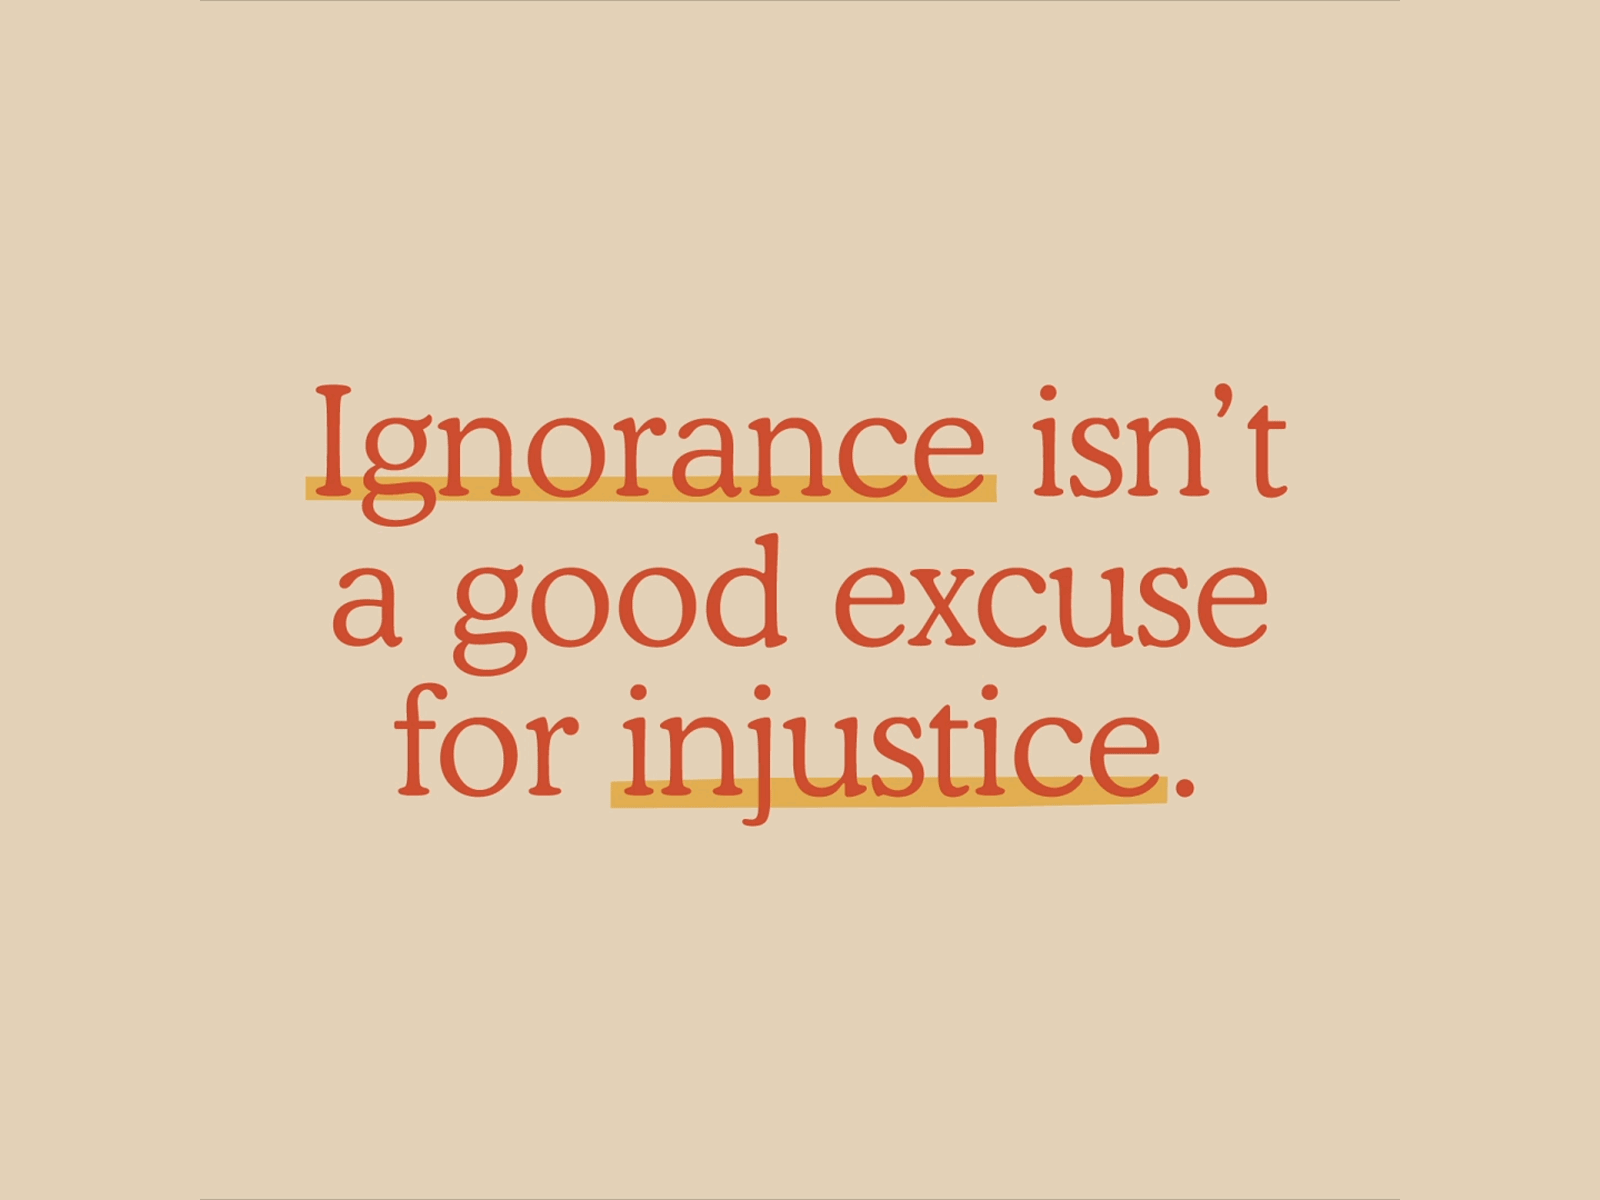 Ignorance isn't an excuse after effects ae interface aftereffects black cooper design font ignorance injustice justice light motion race racism red stopmotion tan tank type typography underline